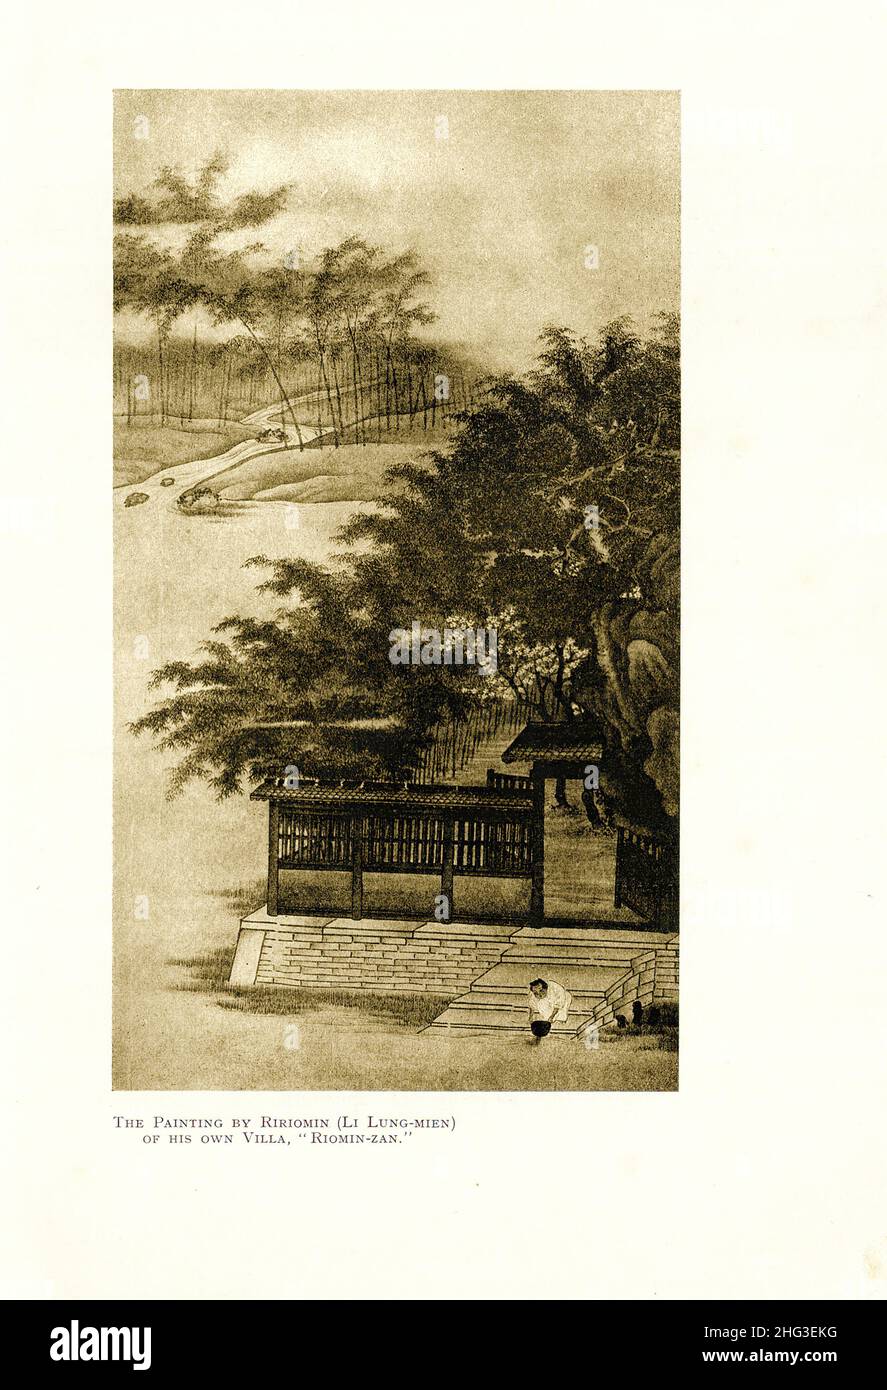 Chinese medieval painting of his own villa of Li Lung-mien. By Ririomin (Li Lung-mien (1100-1106)). Reproduction of book illustration of 1912 Stock Photo